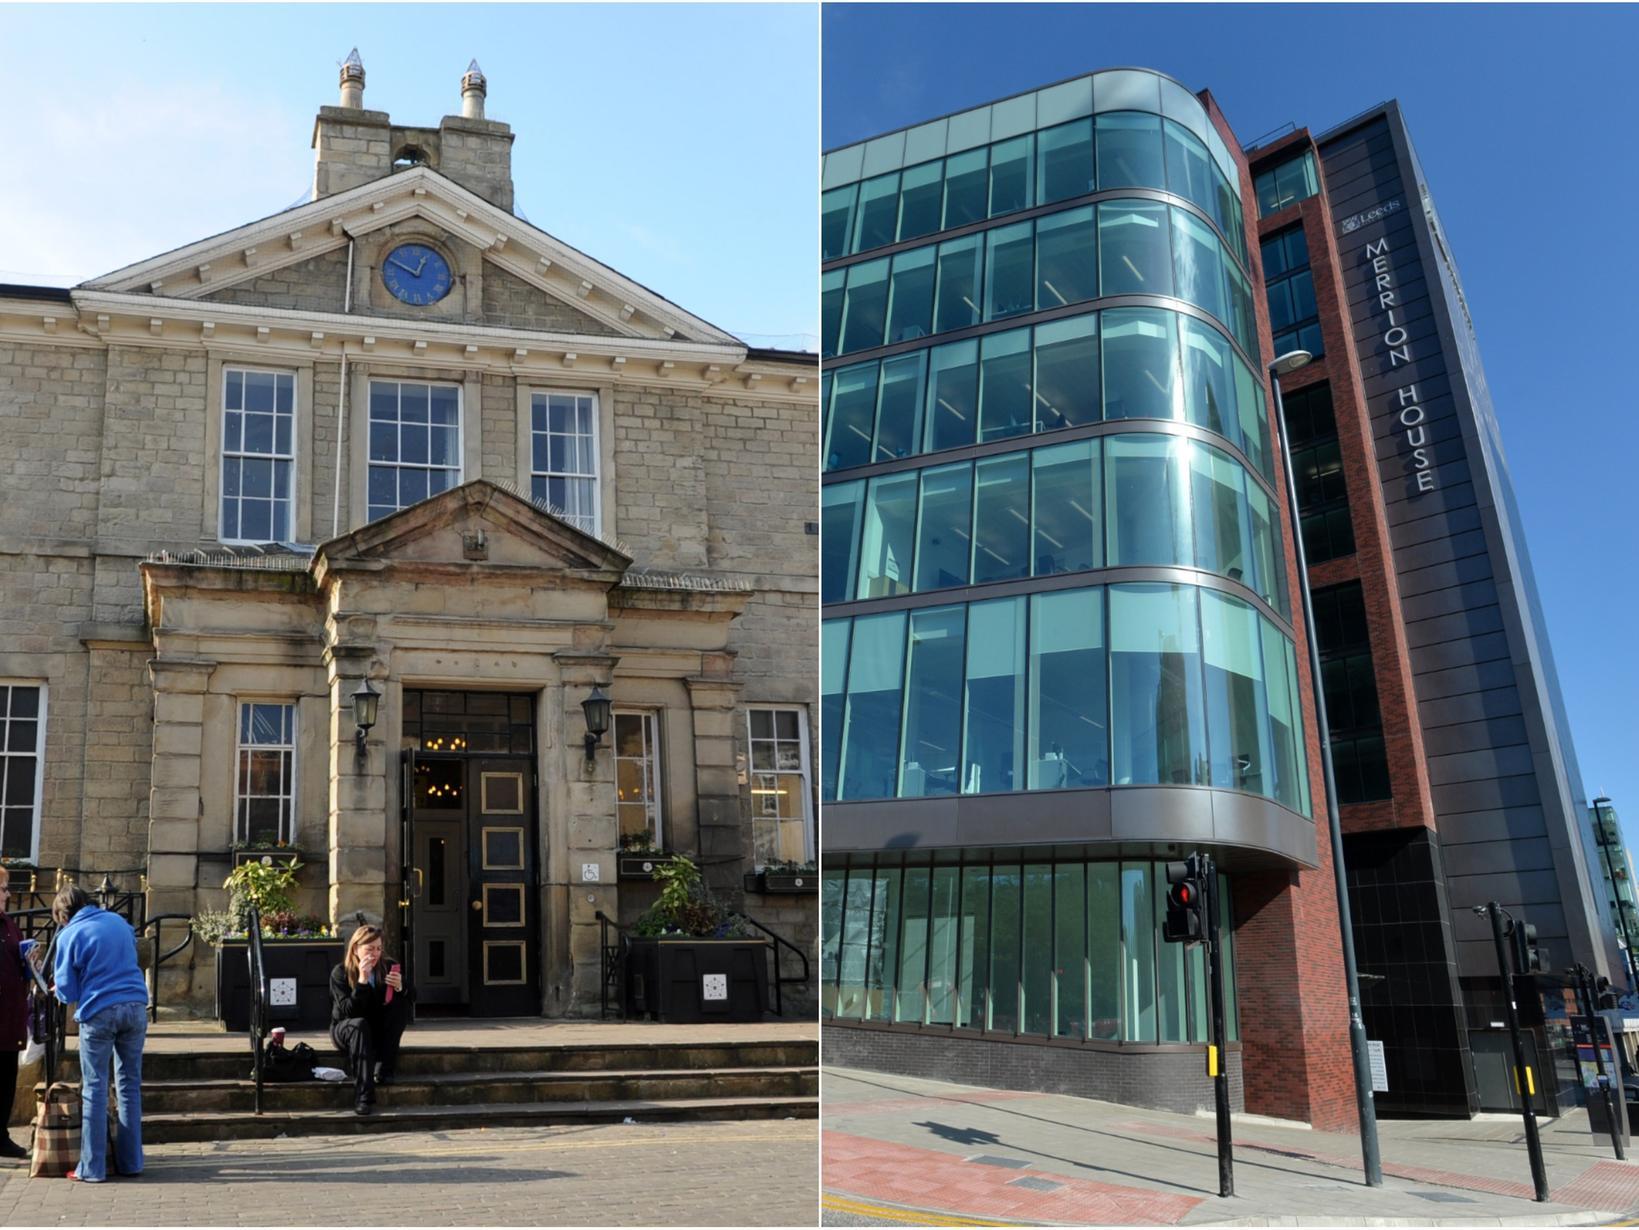 The 10 most expensive Leeds areas for council tax revealed